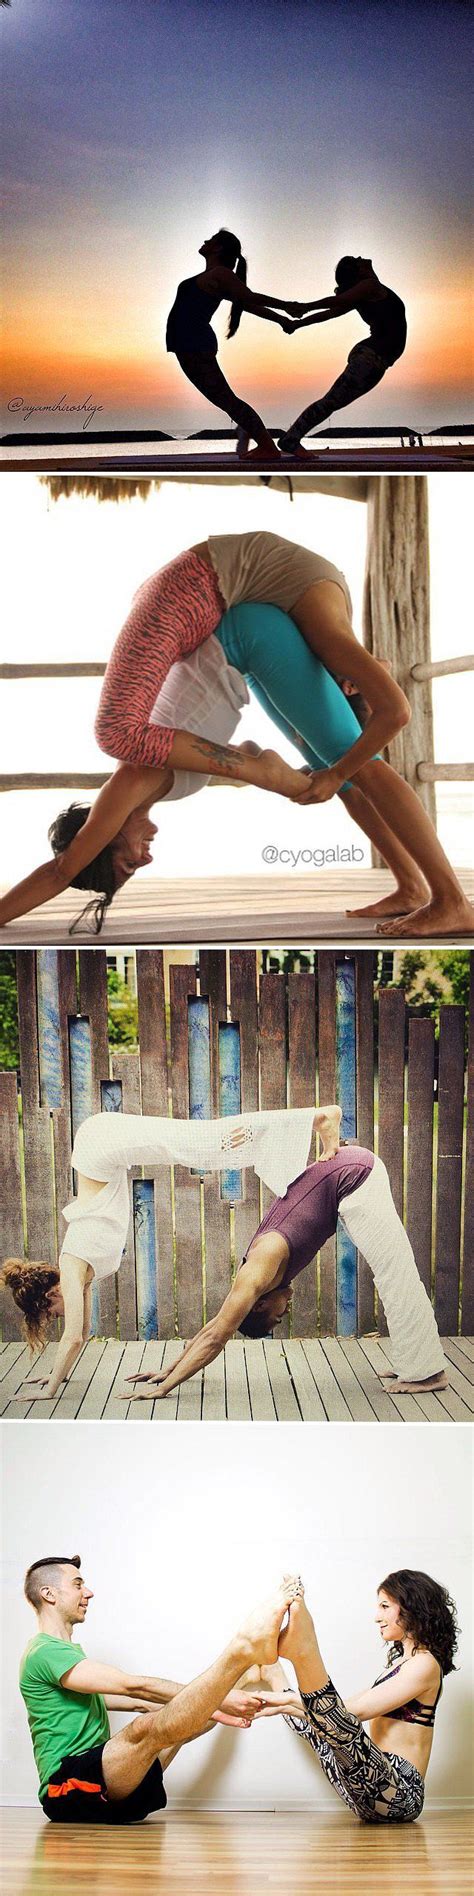 Easy couples yoga poses you've got to try with your partner. 58 best images about 2 person yoga poses on Pinterest ...